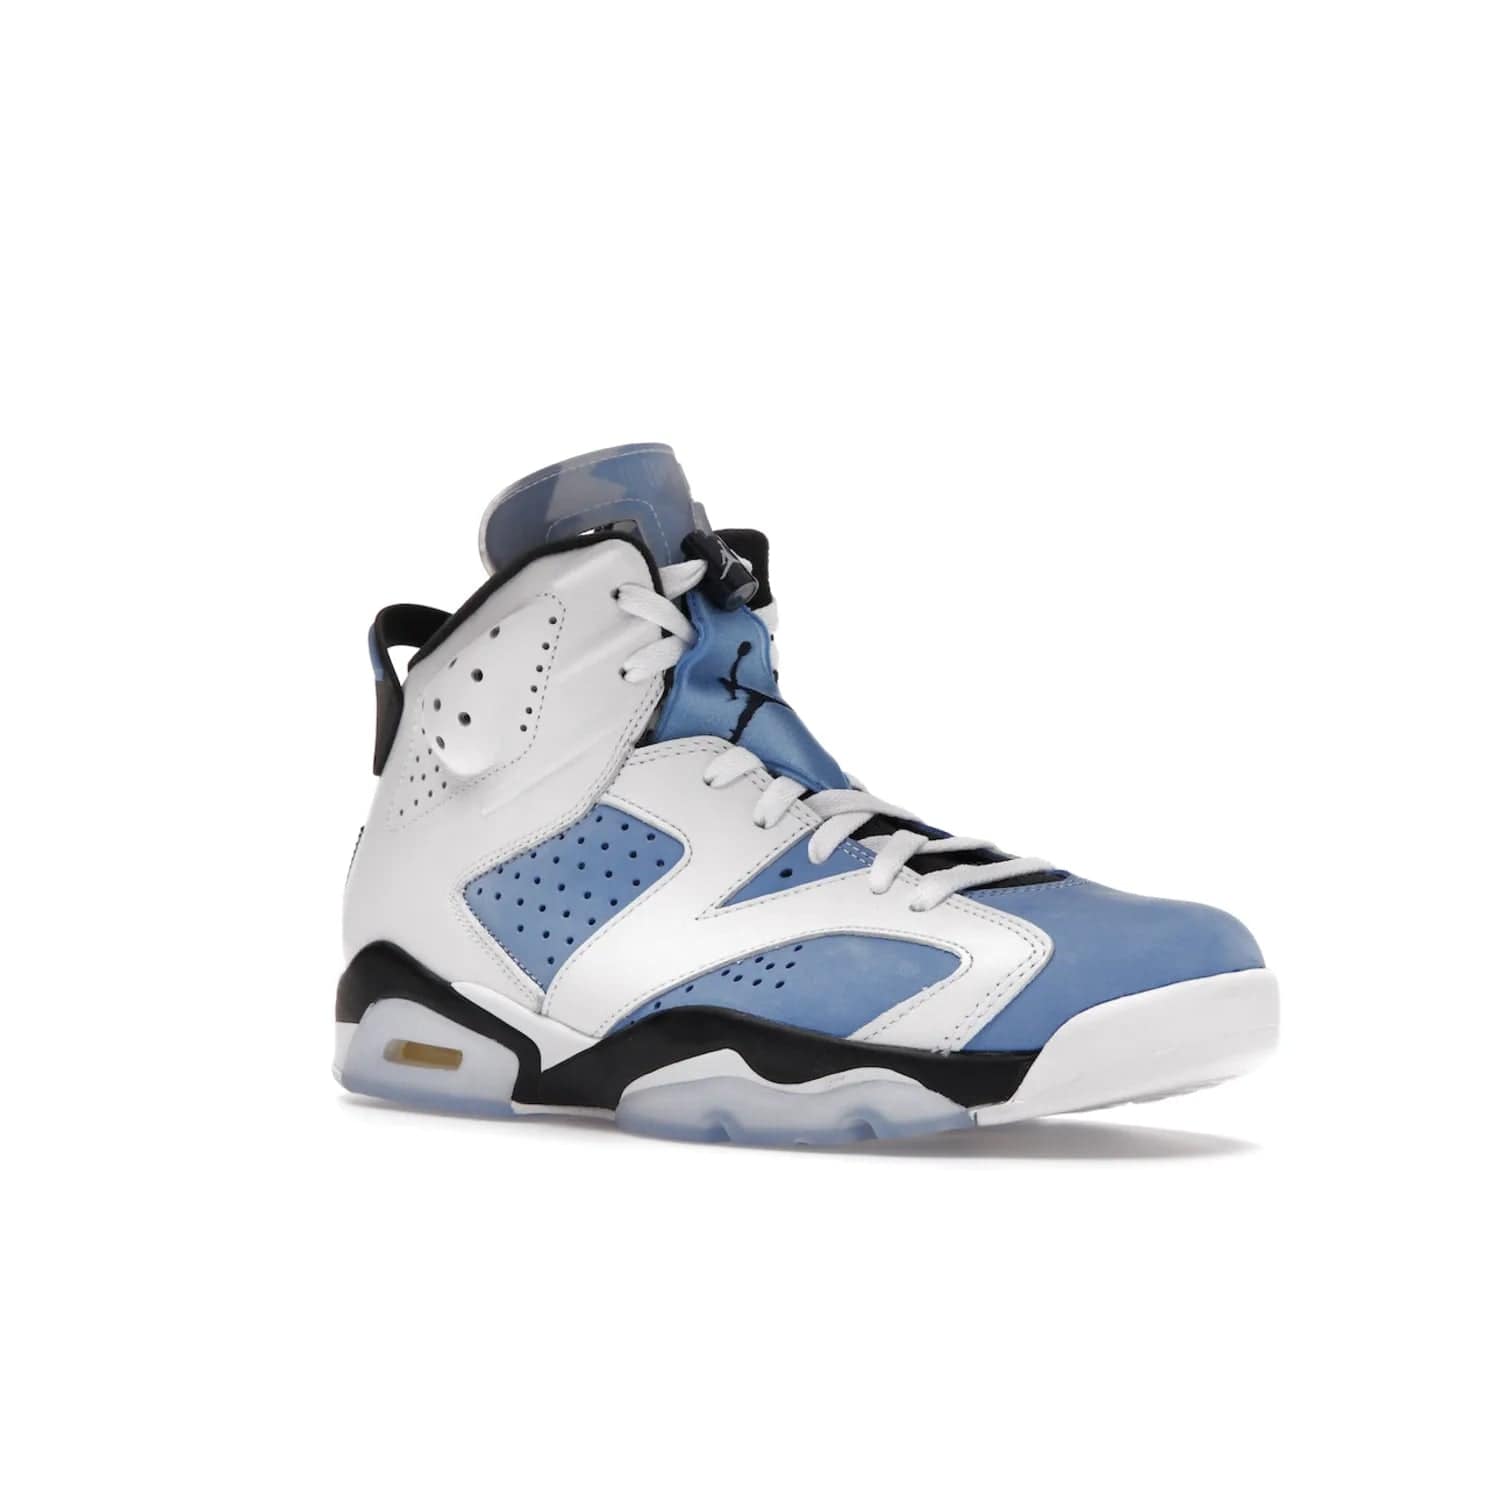 Jordan 6 Retro UNC White - Image 5 - Only at www.BallersClubKickz.com - Air Jordan 6 Retro UNC White with classic UNC colors brings nostalgia and style to a legendary silhouette. Celebrate MJ's alma mater with navy blue accents, icy semi-translucent sole and Jordan Team patch. Out March 2022 for the Sneaker Enthusiast.